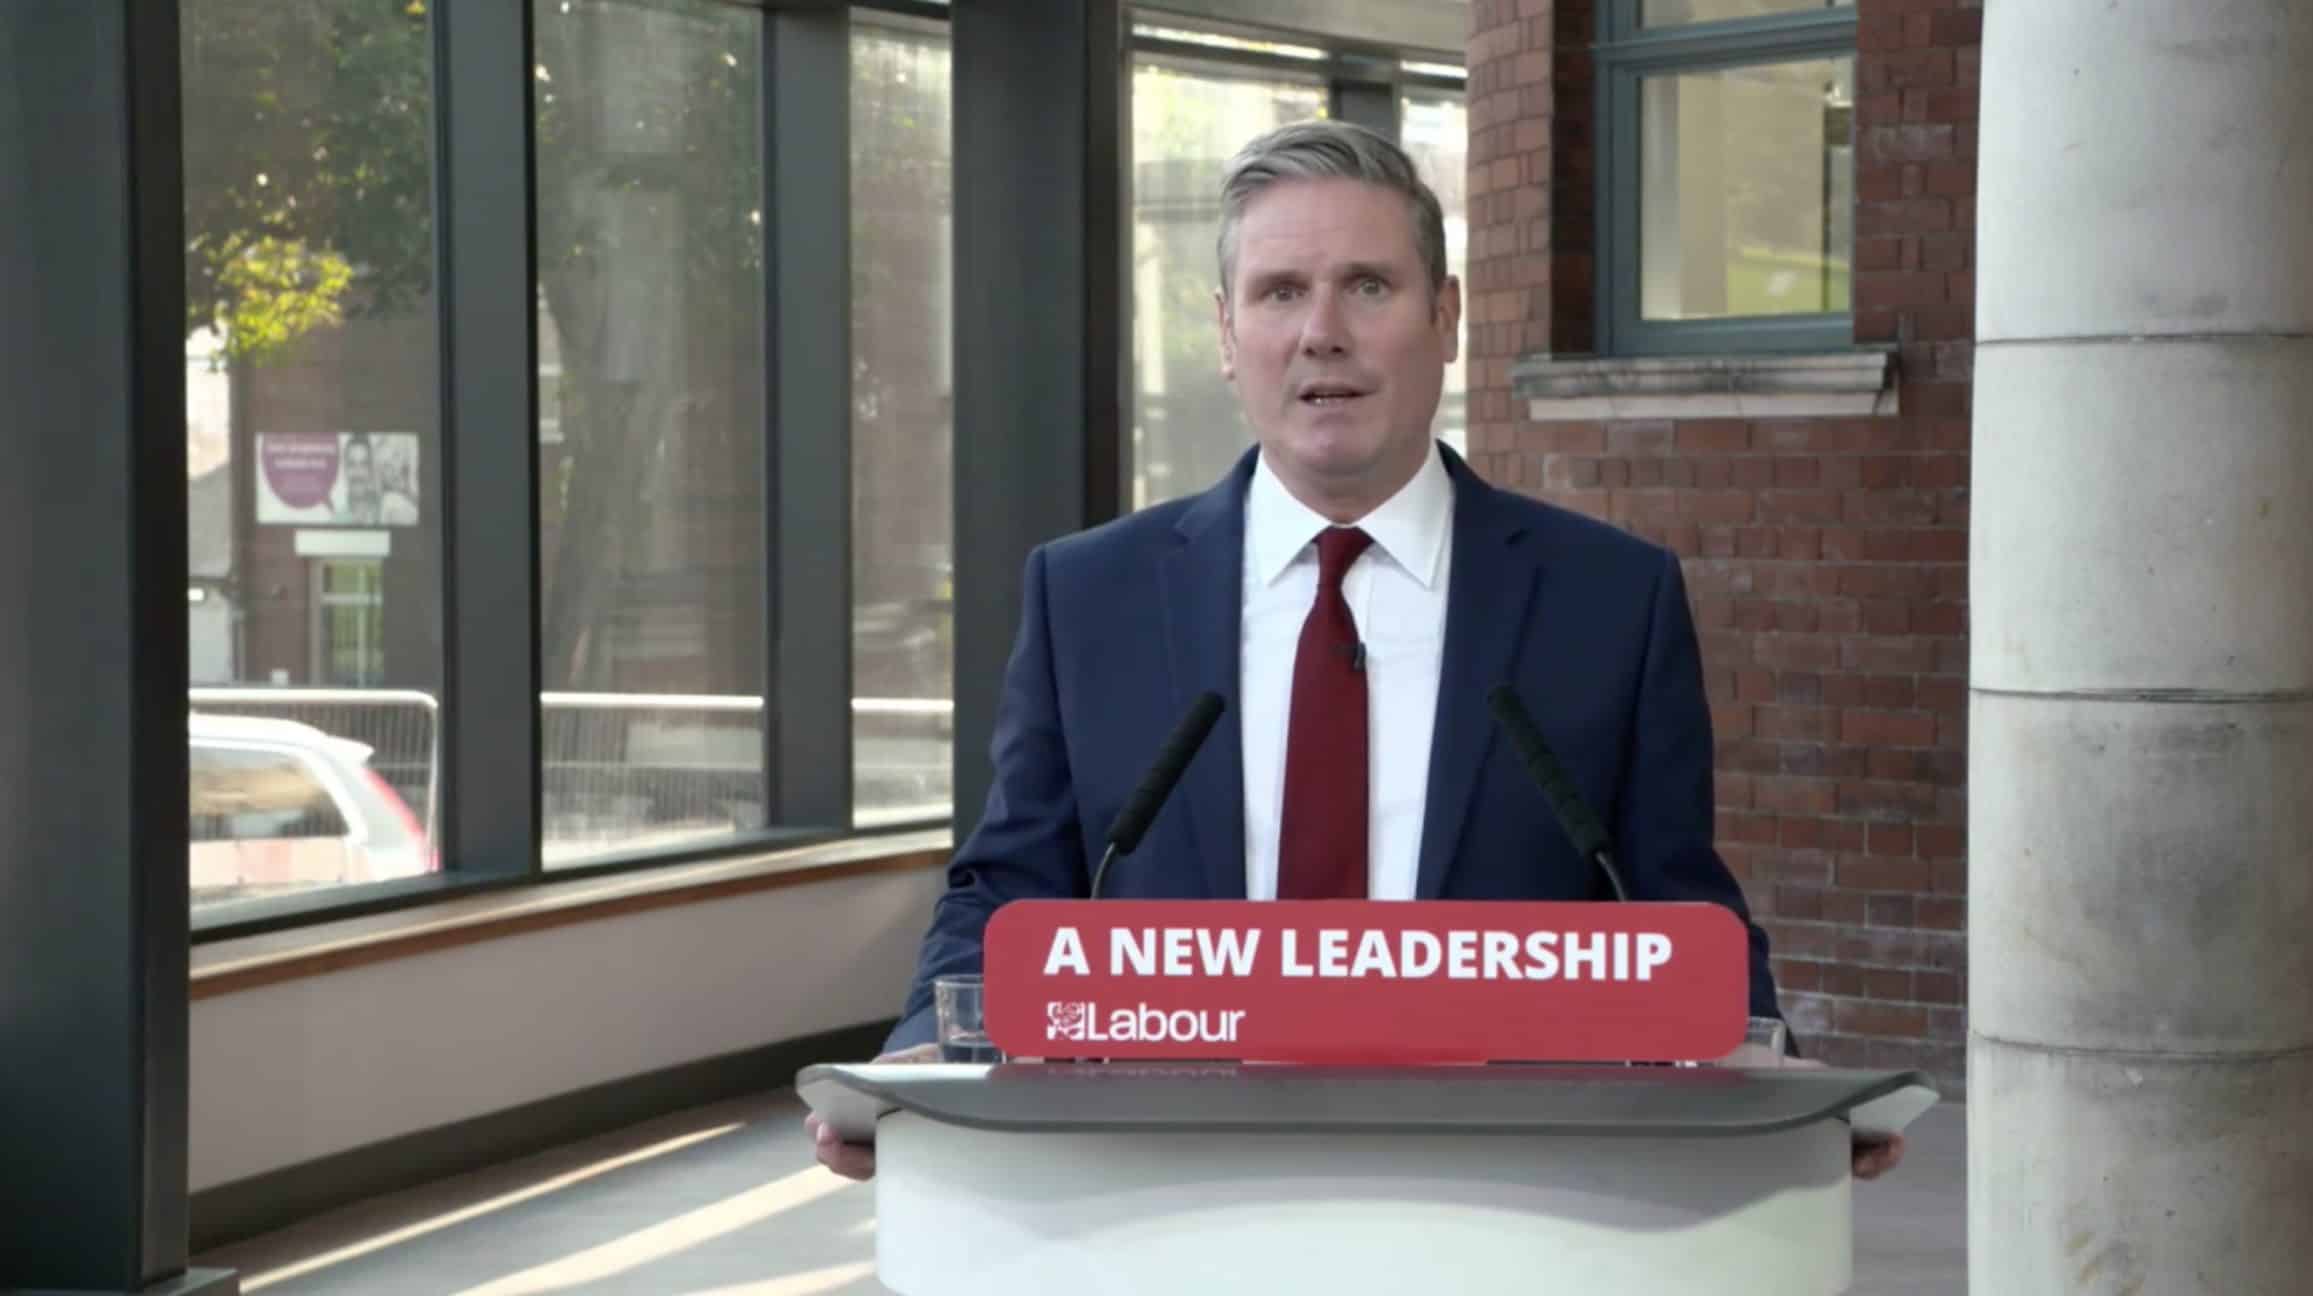 A white man in a suit stood at a press stand where a sign reads ' A New Leadership / Labour'